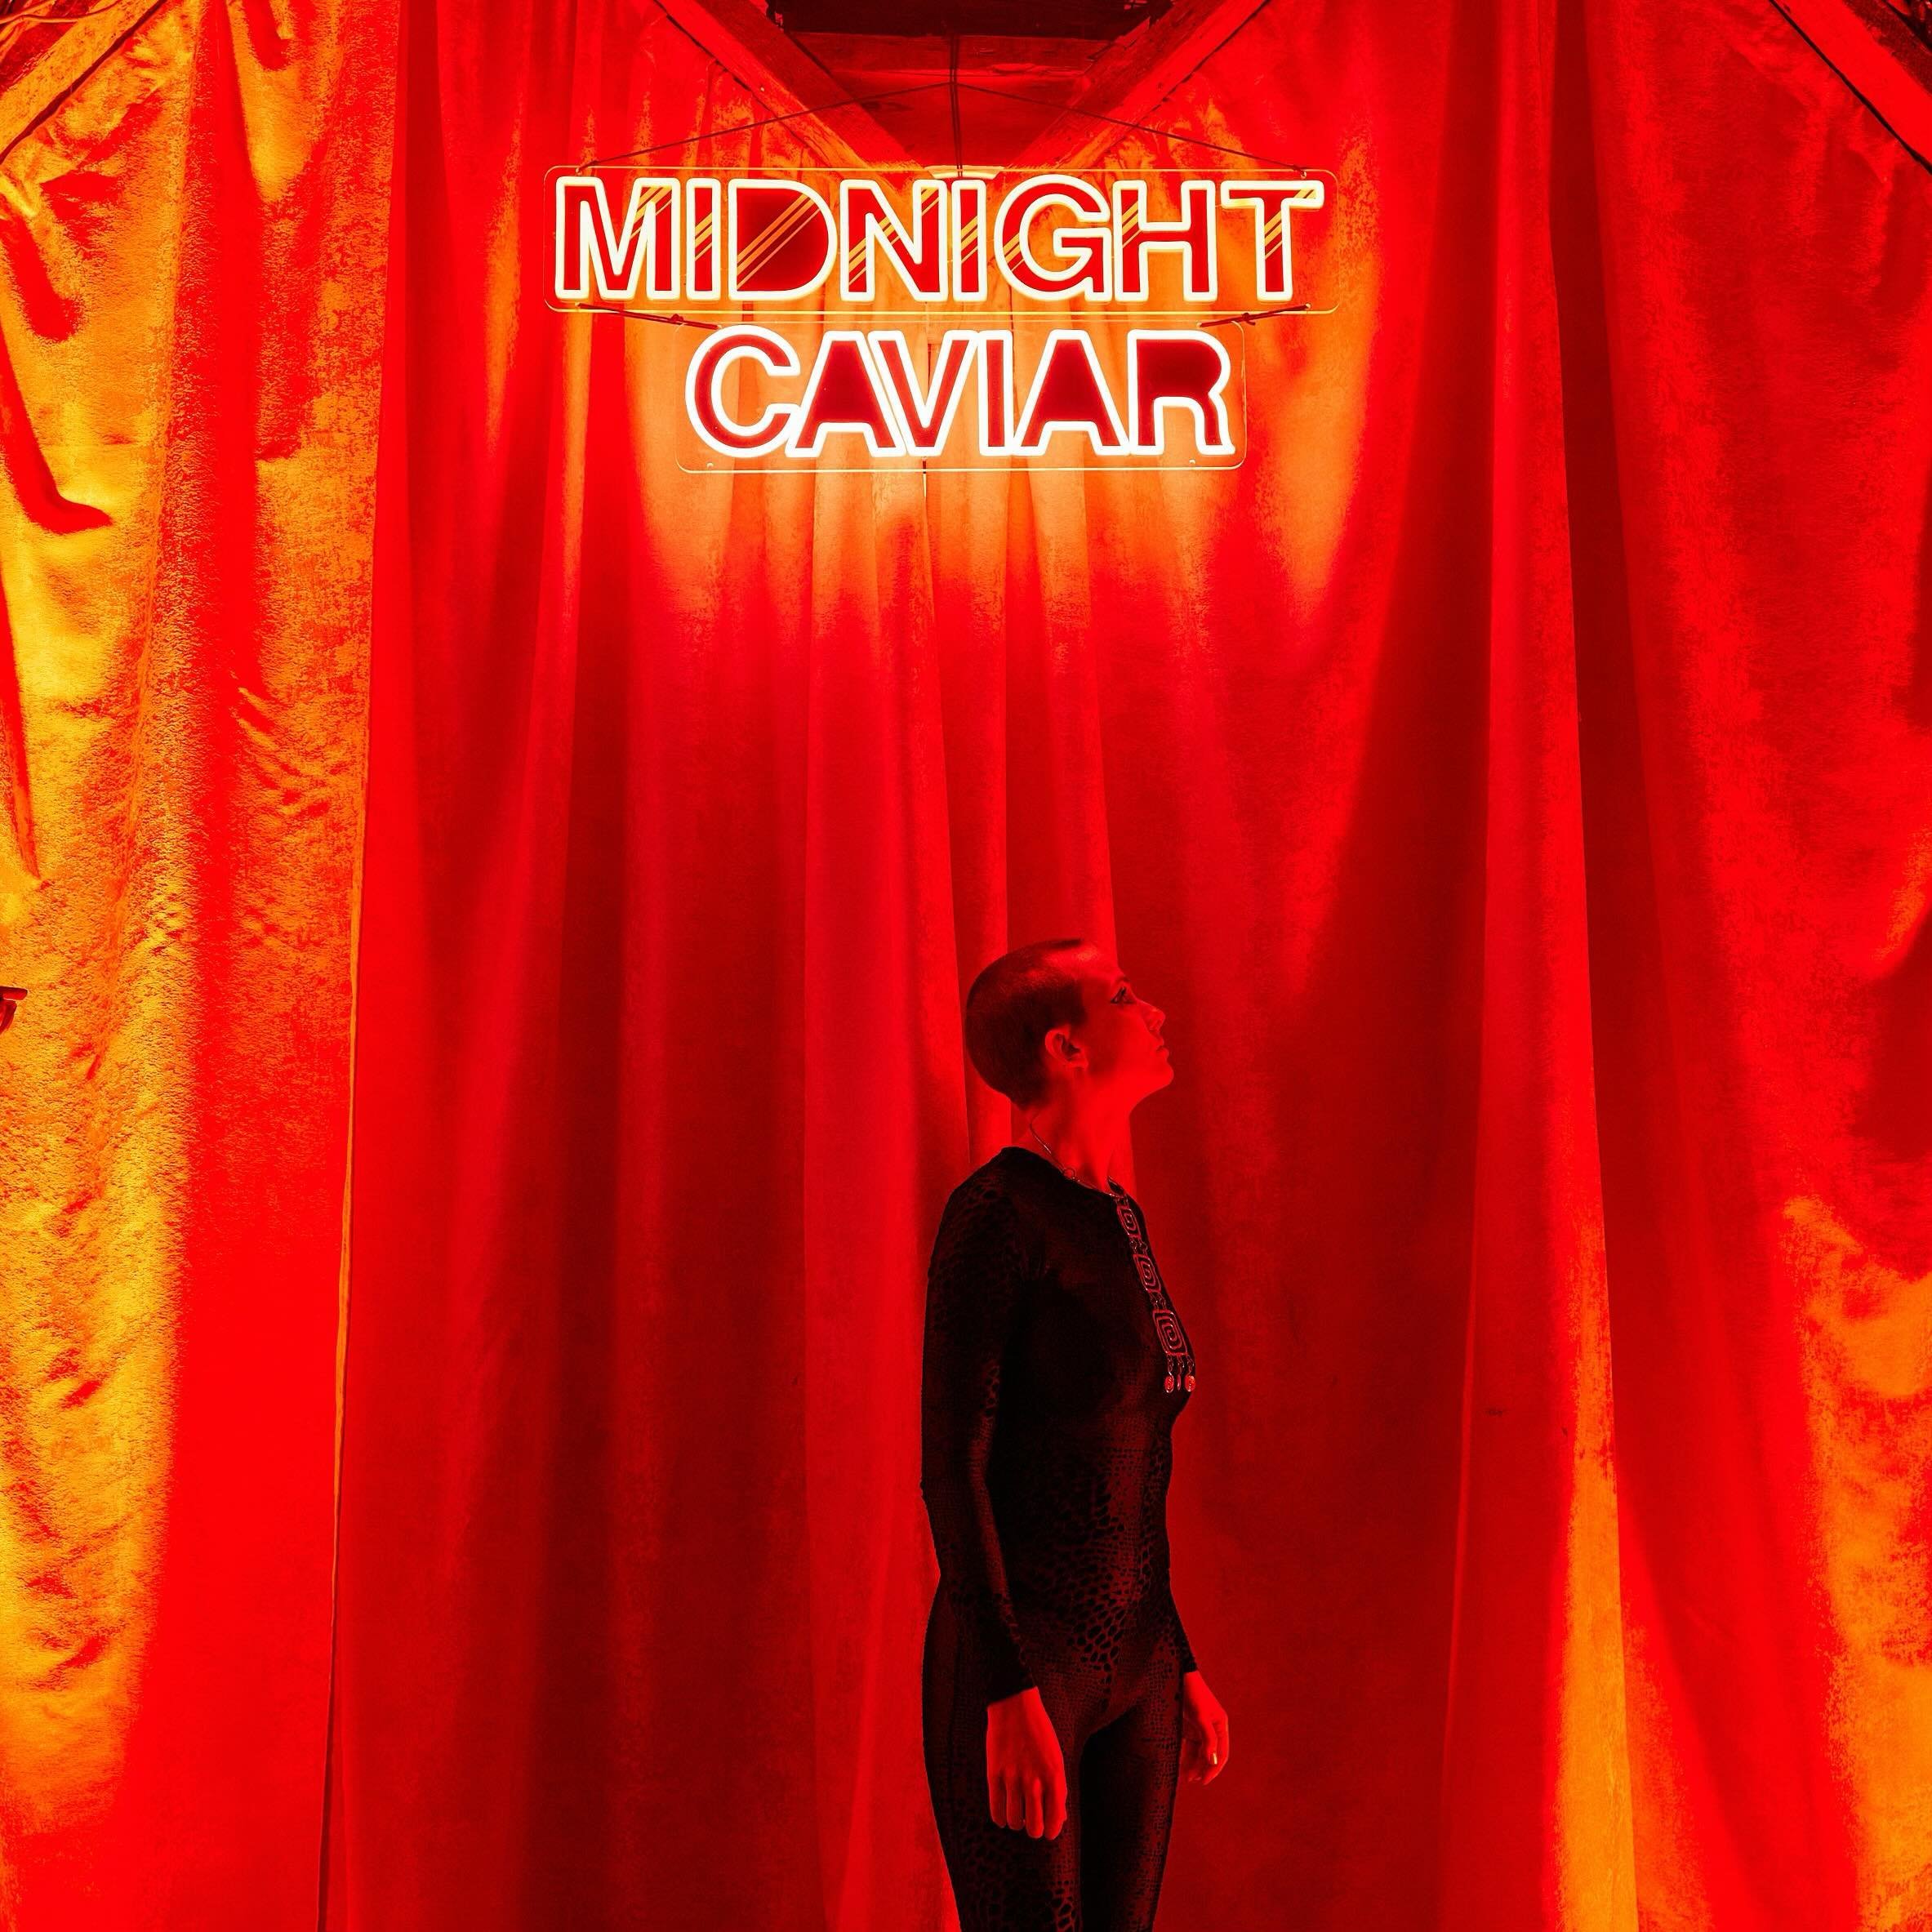 It&rsquo;s almost time to pull the curtain back for a new Midnight Caviar experience&hellip;

- - &gt; M A Y 2 4 (tickets in bio)